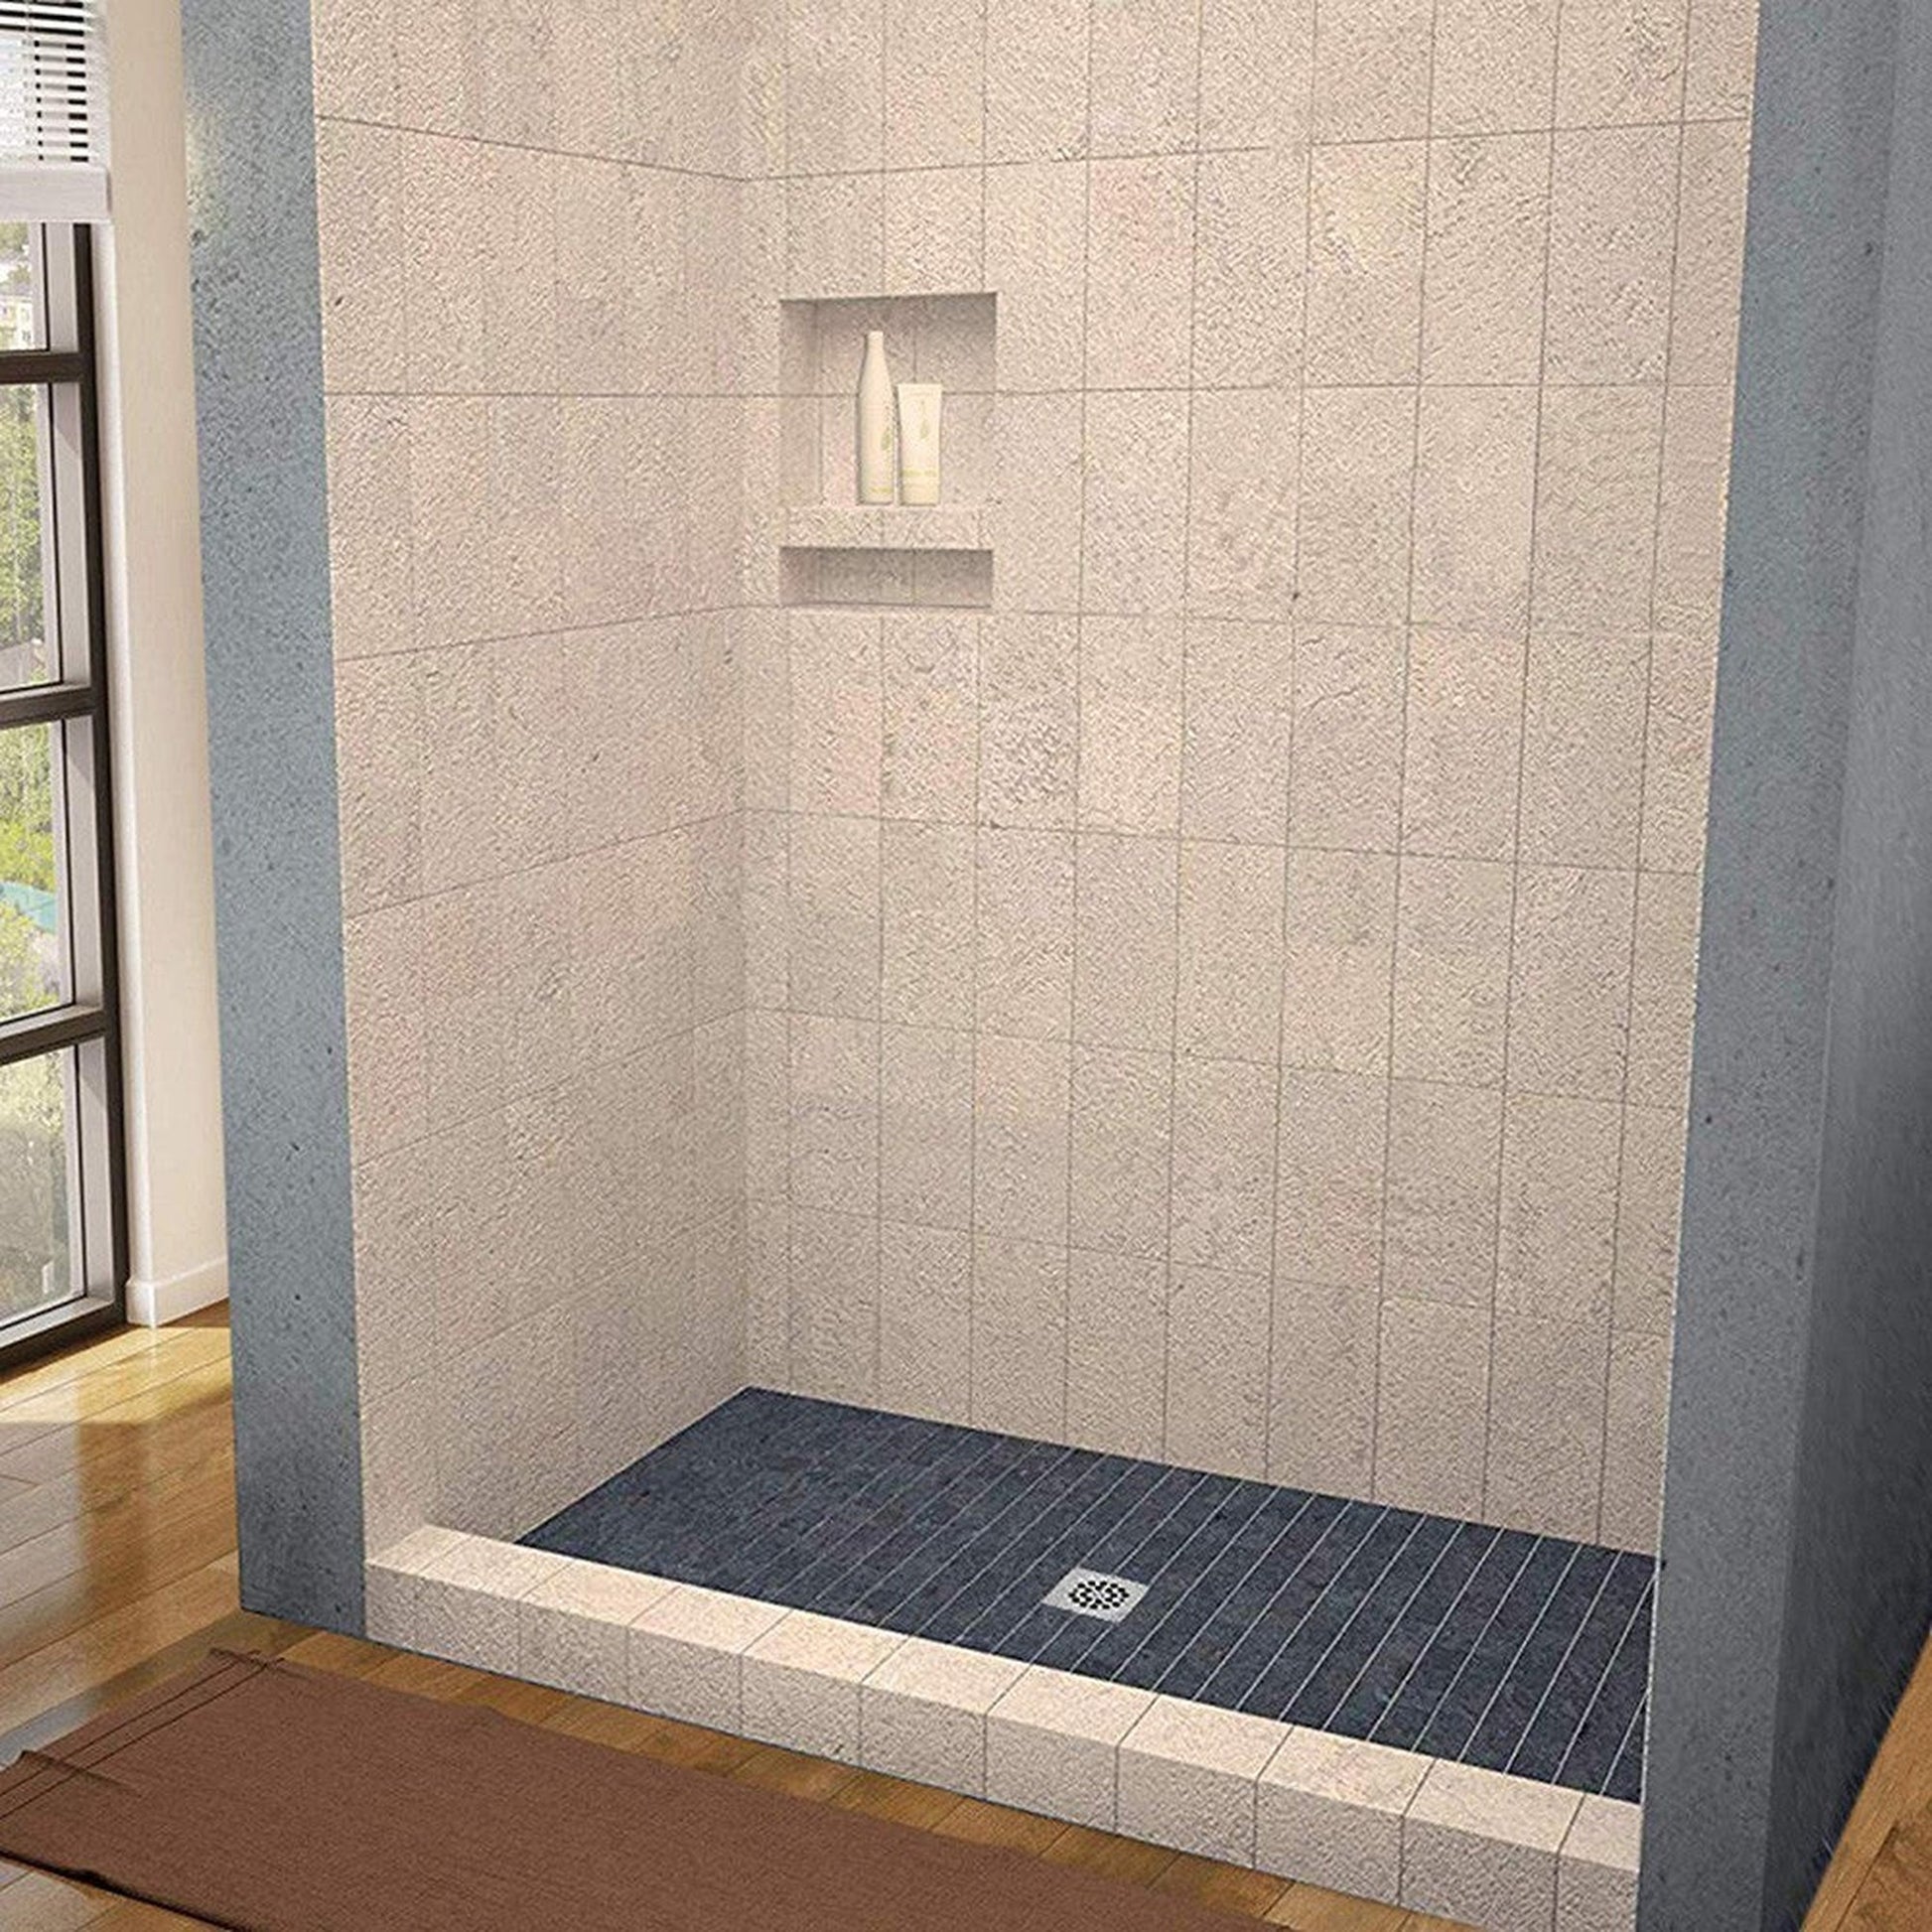 WoodBridge 60" x 36" Black Solid Tileable Shower Base With Integrated Center PVC Drain